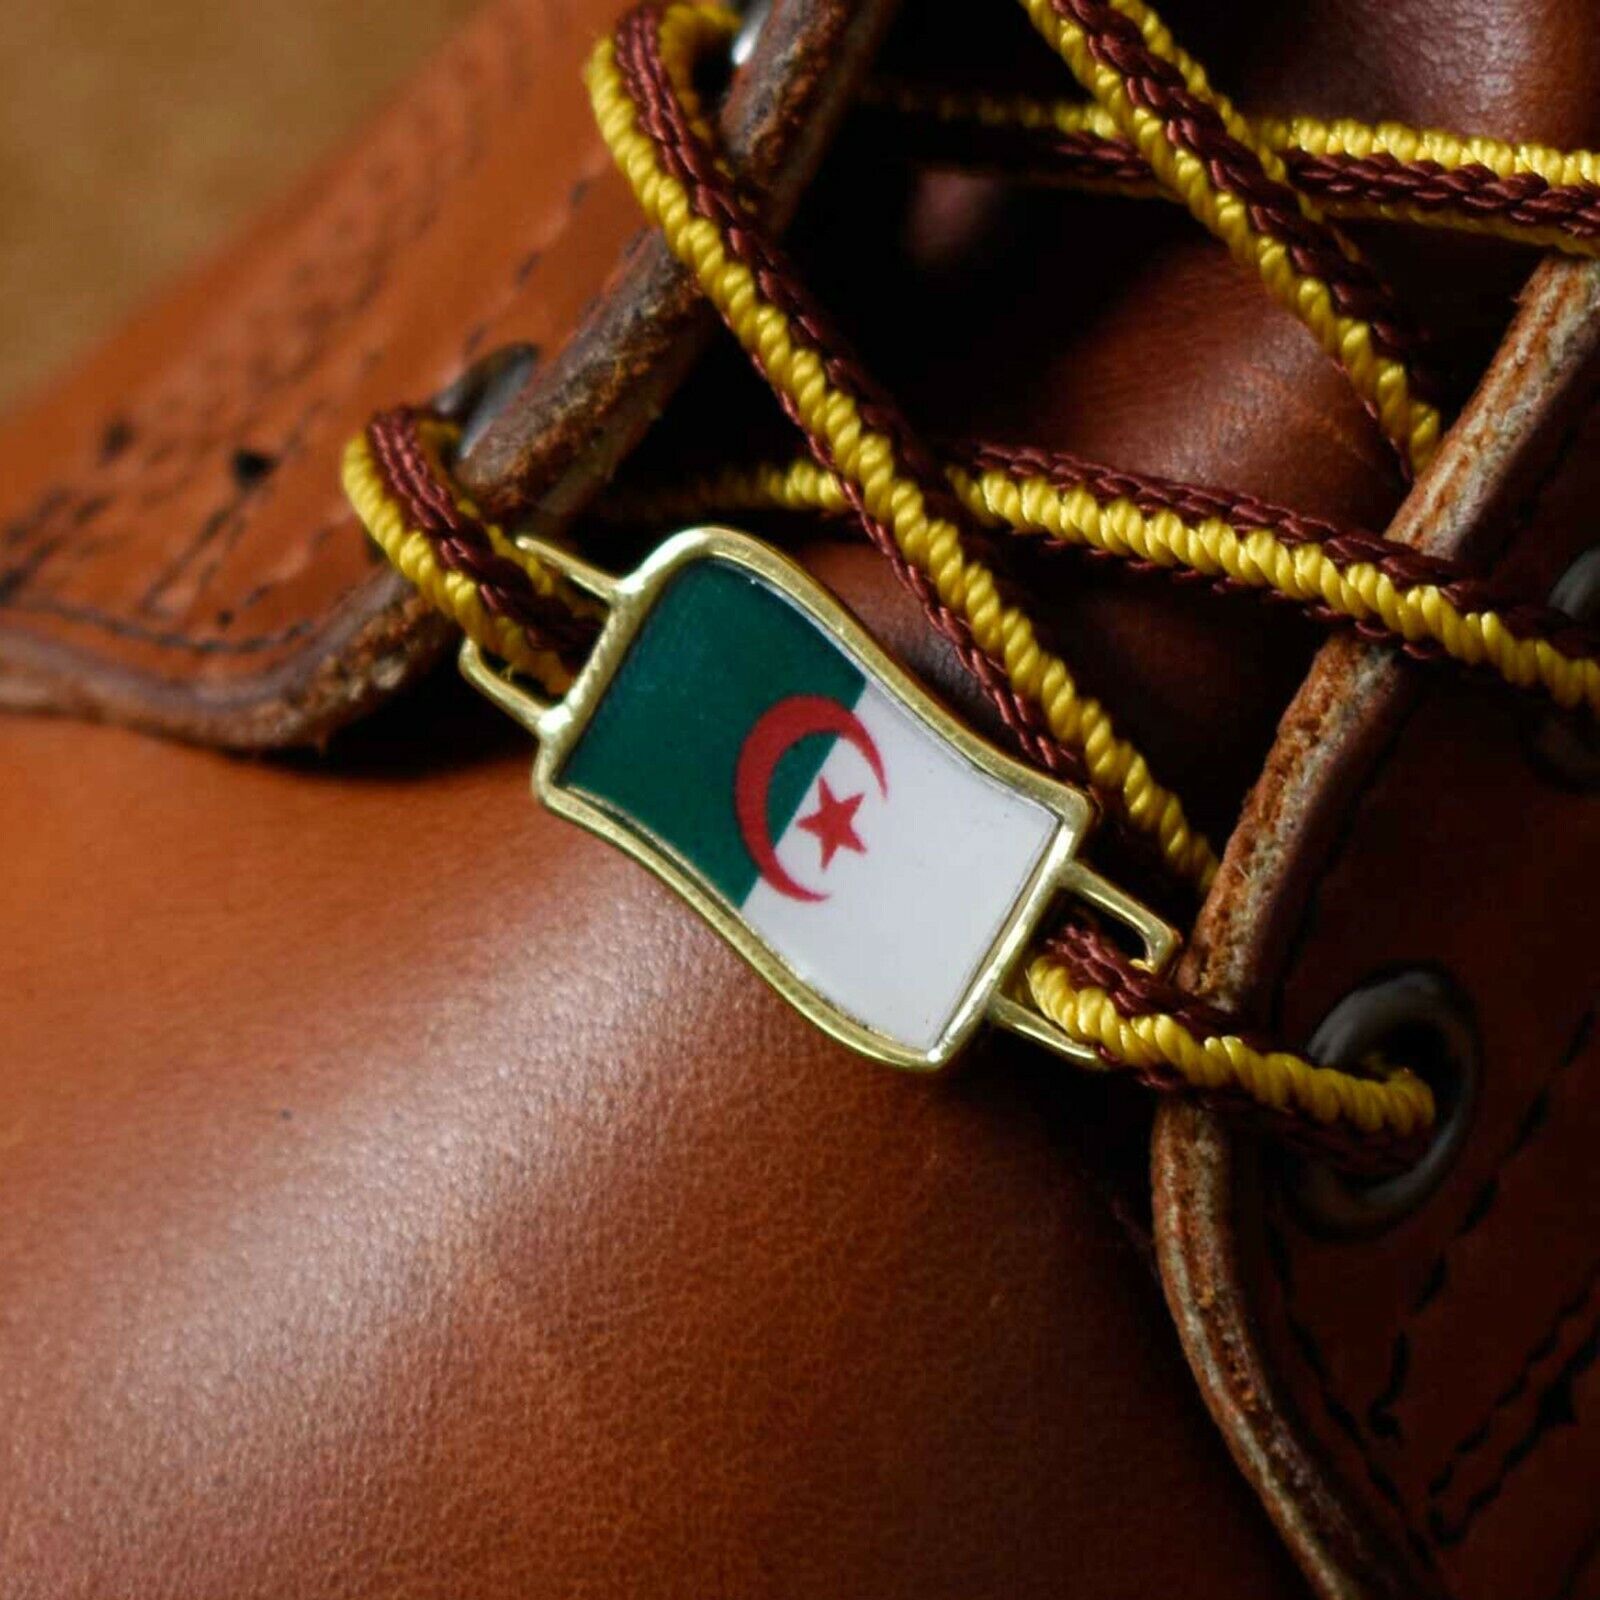 Algeria Flags Shoes Boot Shoelace Keeper Holder Charm BrooklynMaker